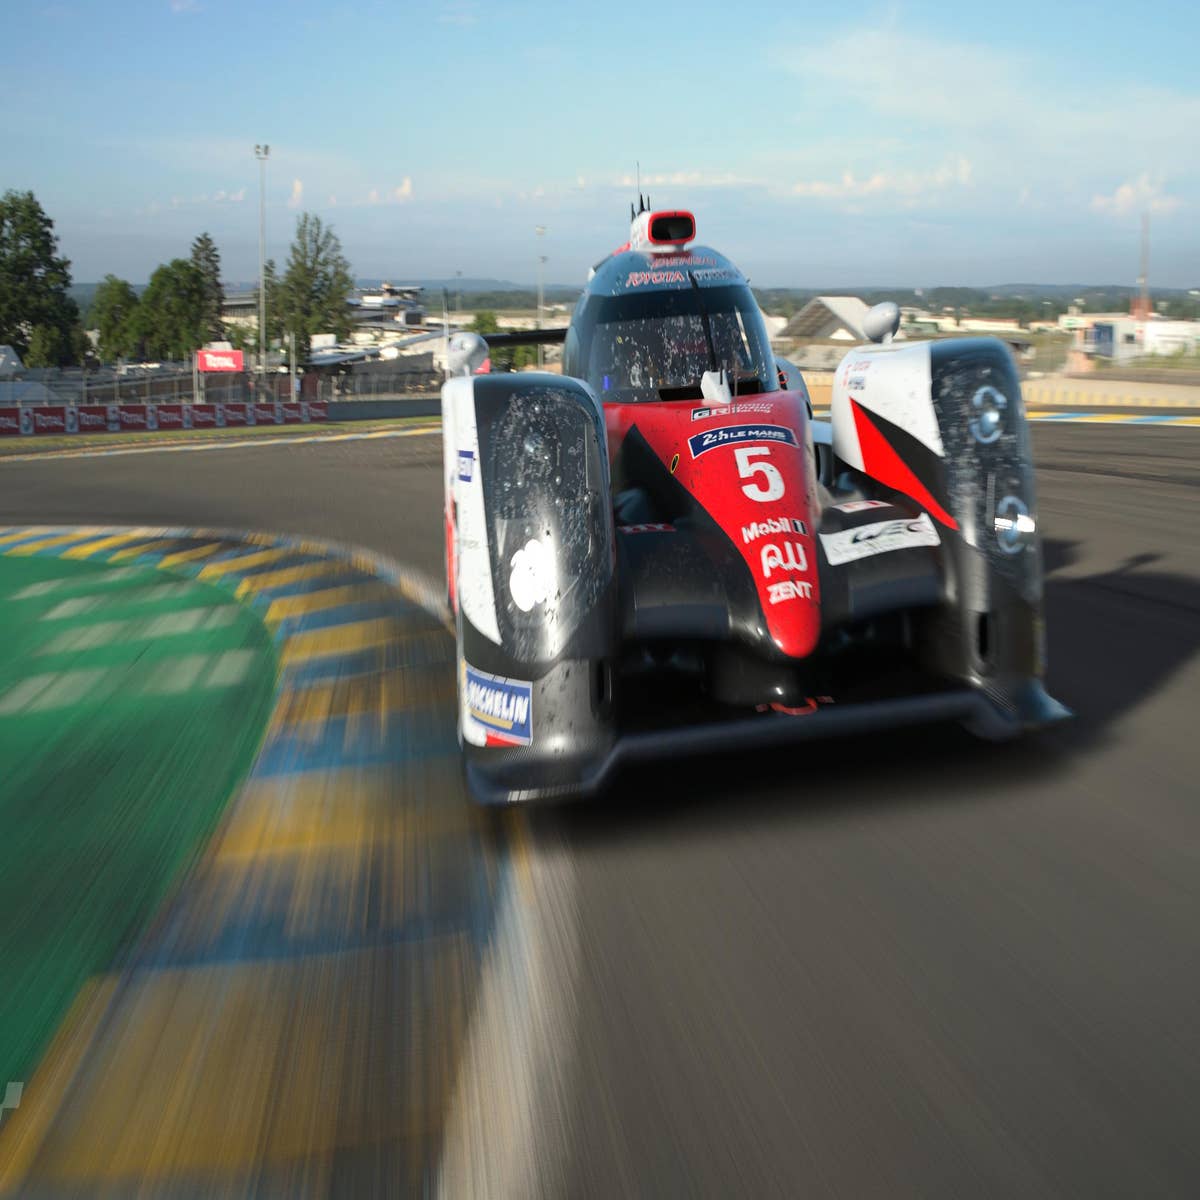 Gran Turismo 7: Stunning Cars, Heavy Microtransactions - PS5 Review